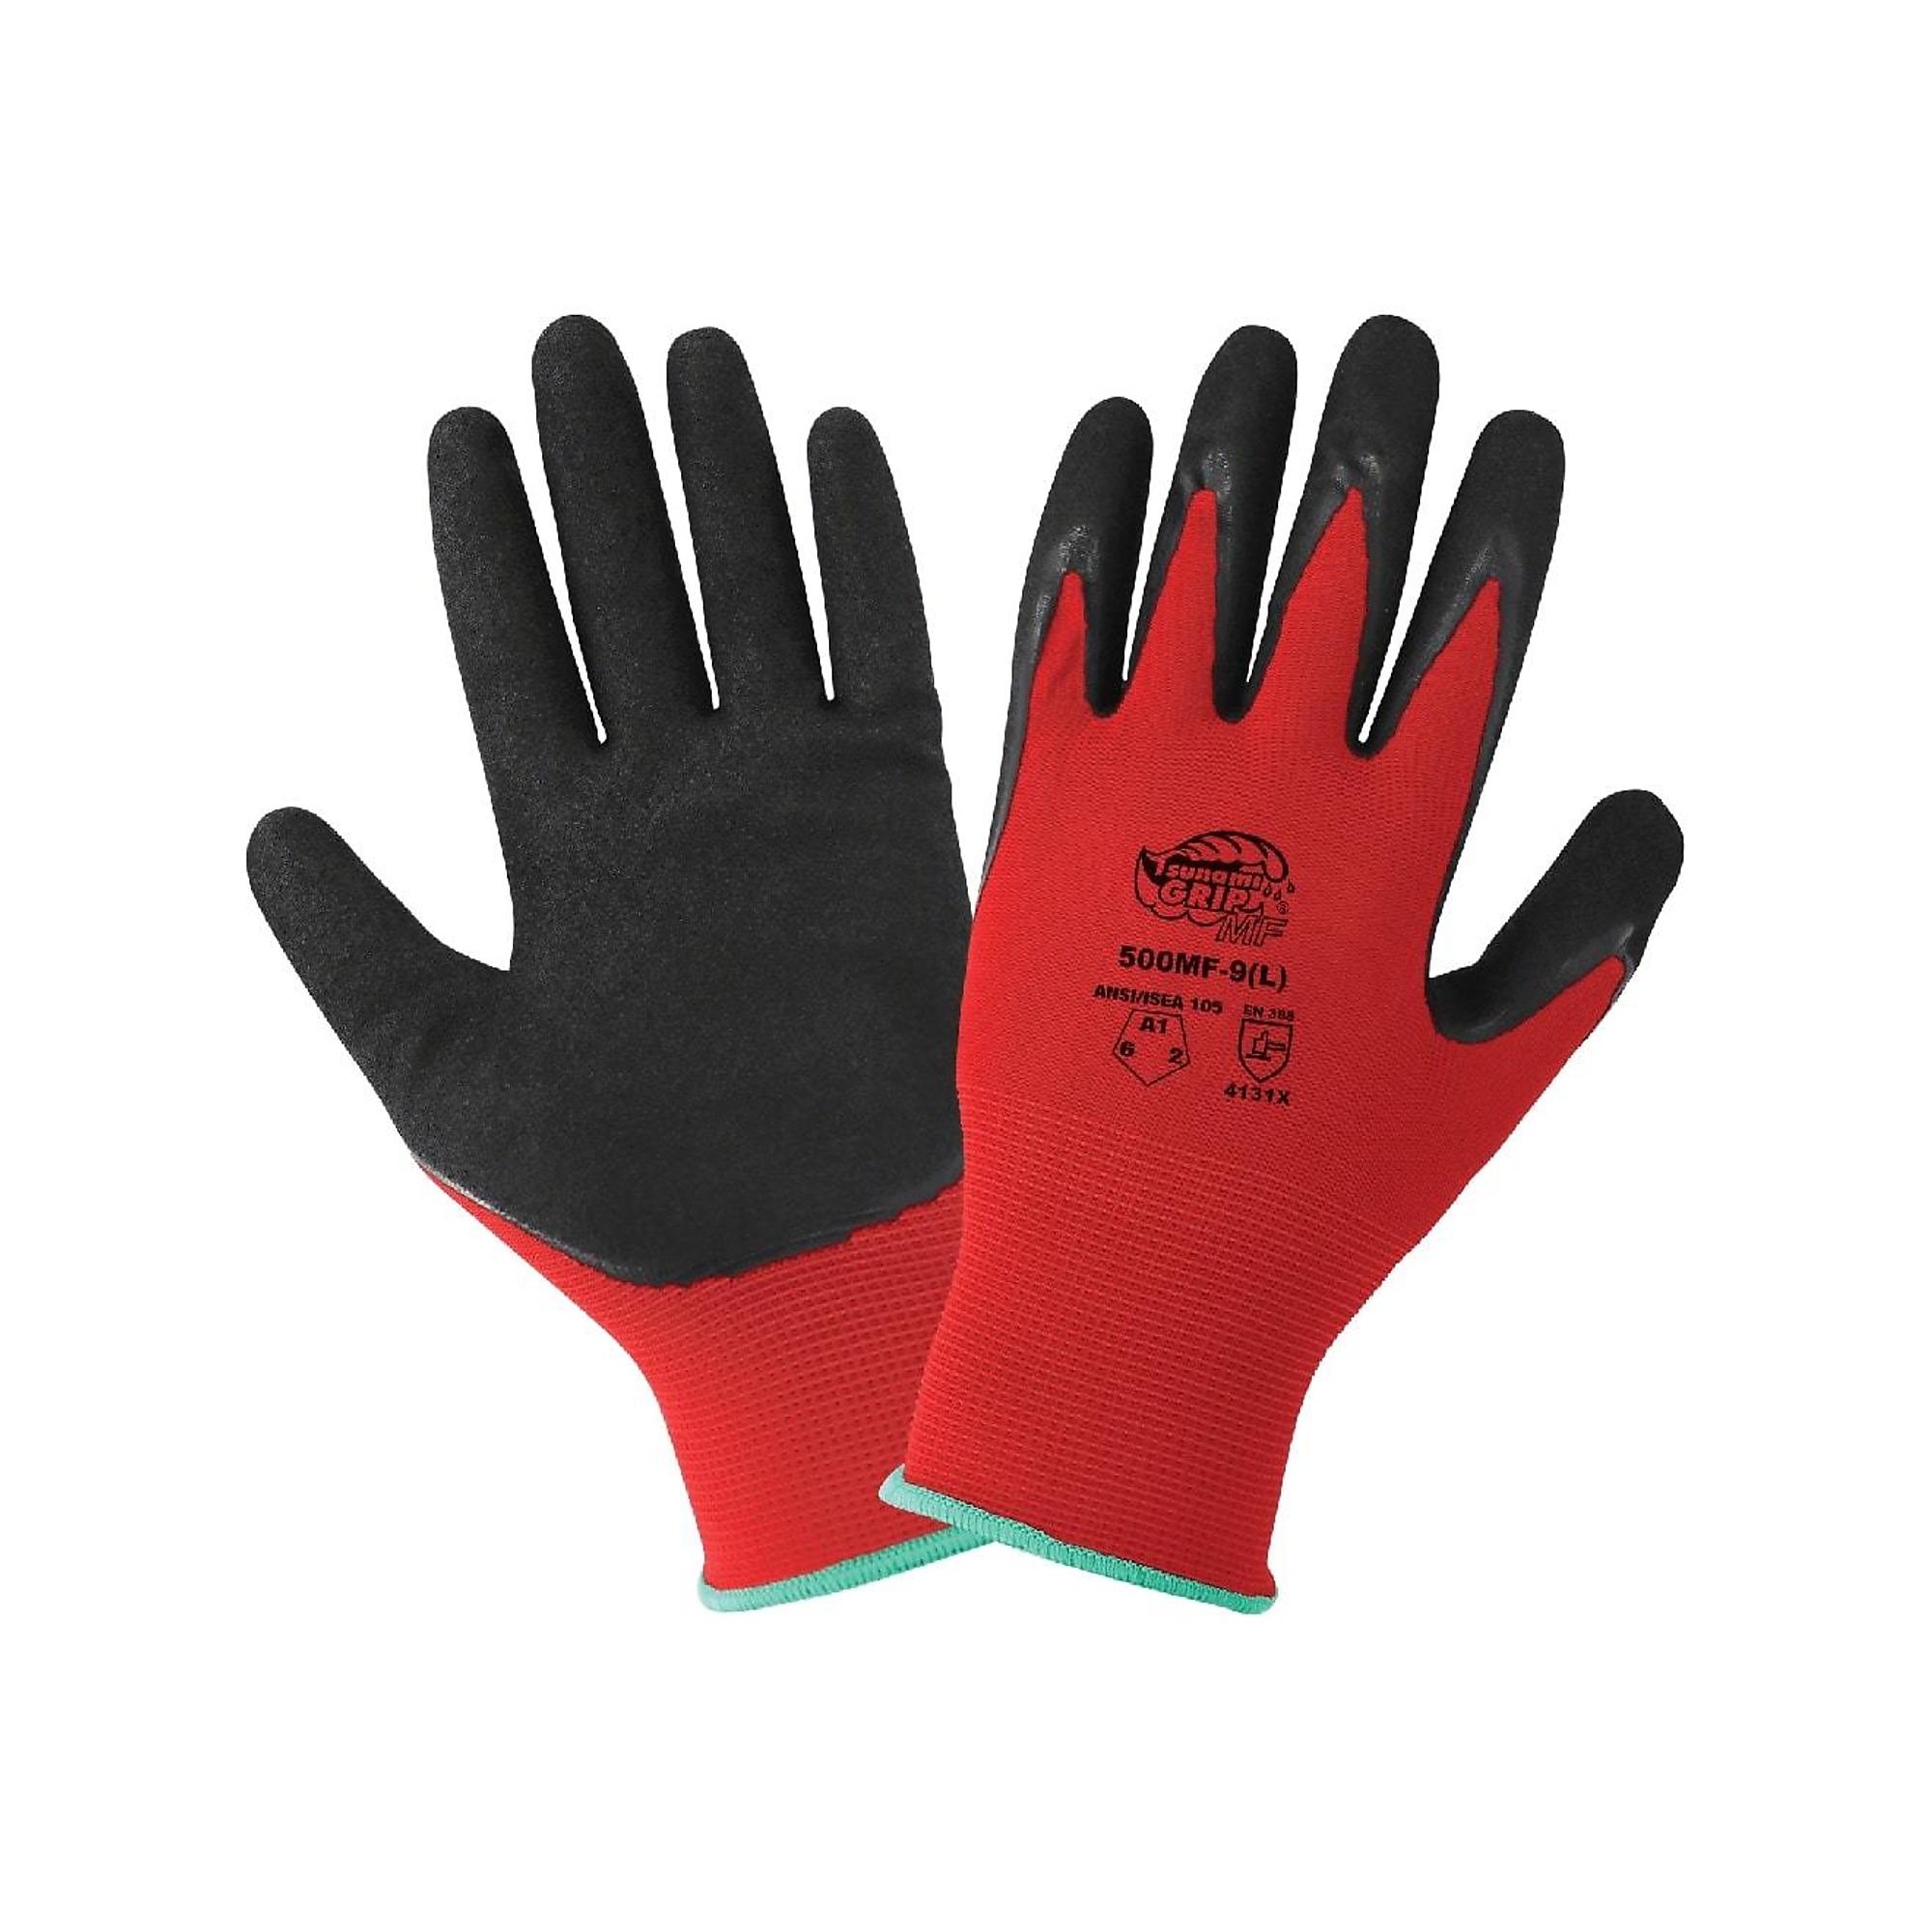 Global Glove Tsunami Grip , Red, Black Double Nitrile Coat, Cut Resist A1 Gloves-12 Pair, Size 2XL, Color Red/Black, Included (qty.) 12 Model 500MF-11